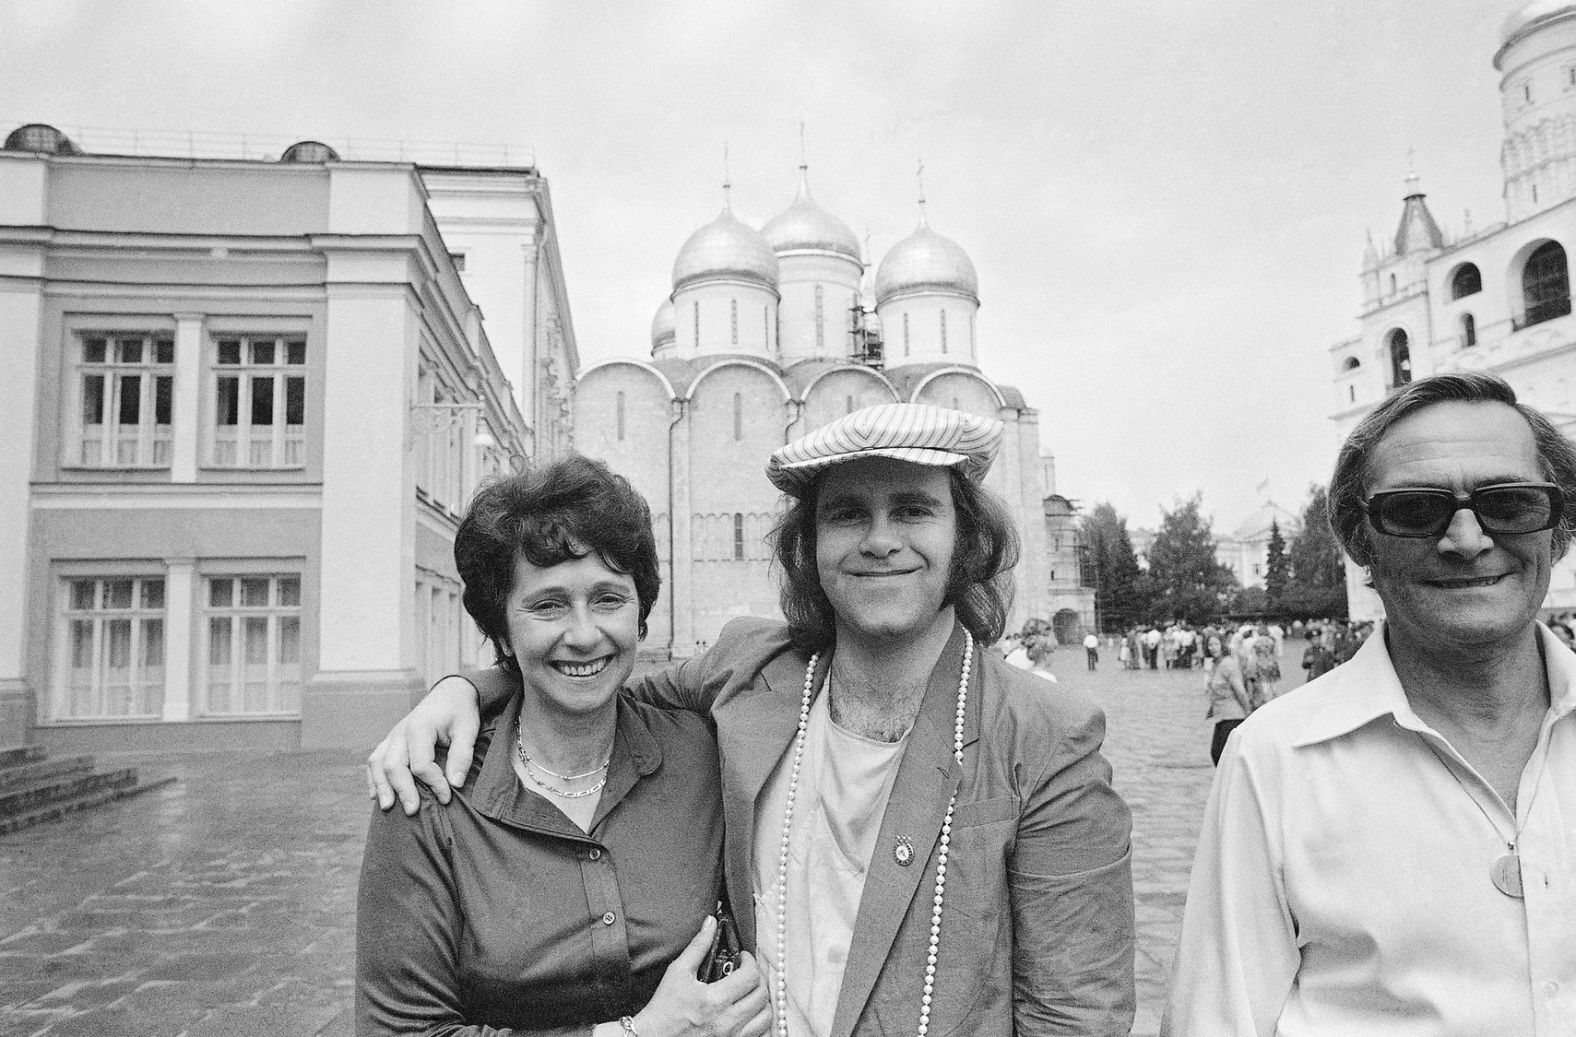 John poses with his mother and stepfather while touring the Kremlin in Moscow in 1979. He was the first rock or pop star from the West to perform in the Soviet Union.